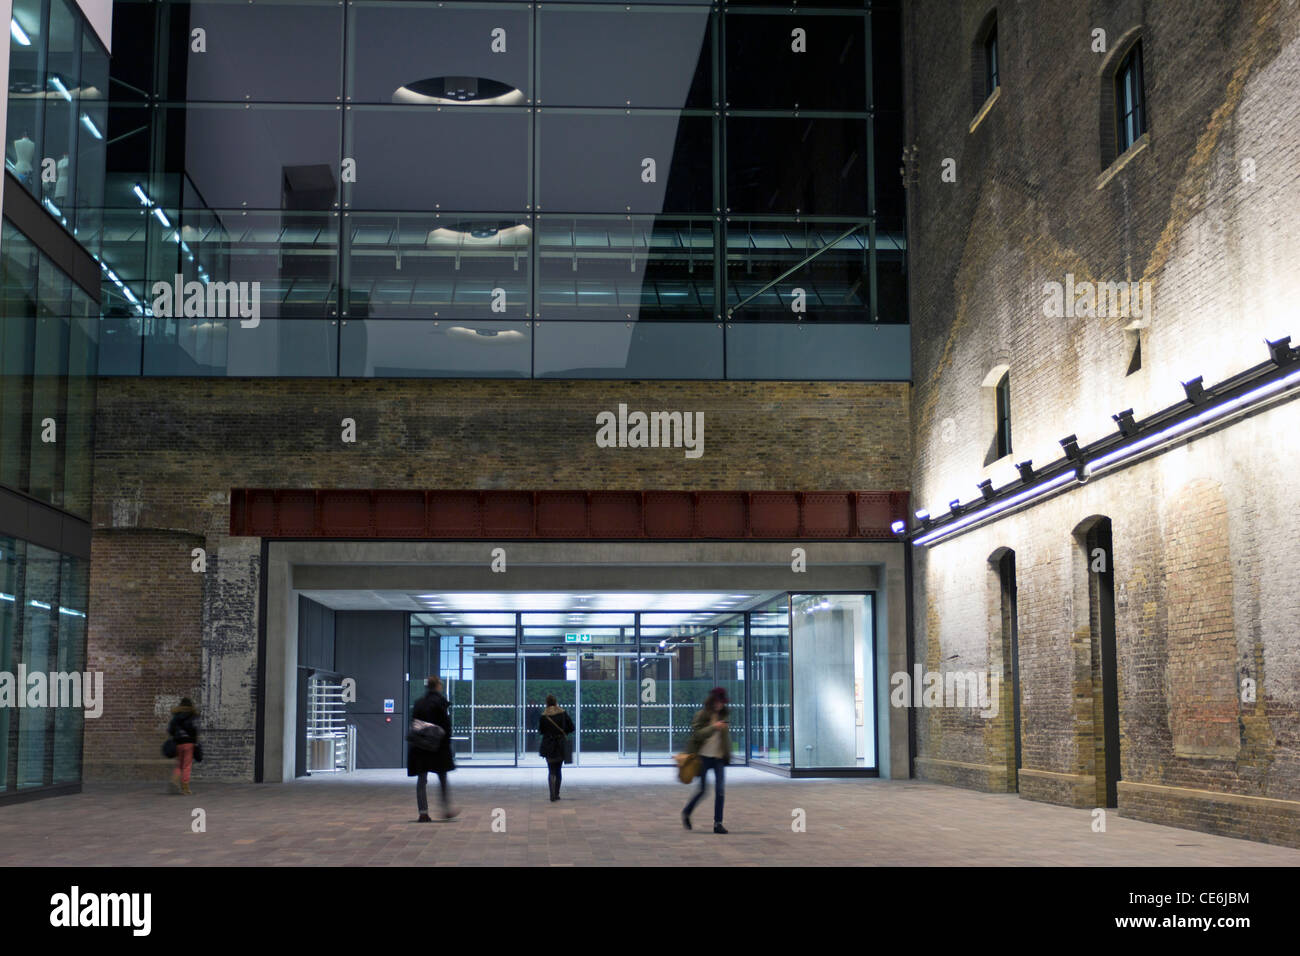 University of Arts - Central St Martins Campus - Kings Cross Central - London Stock Photo